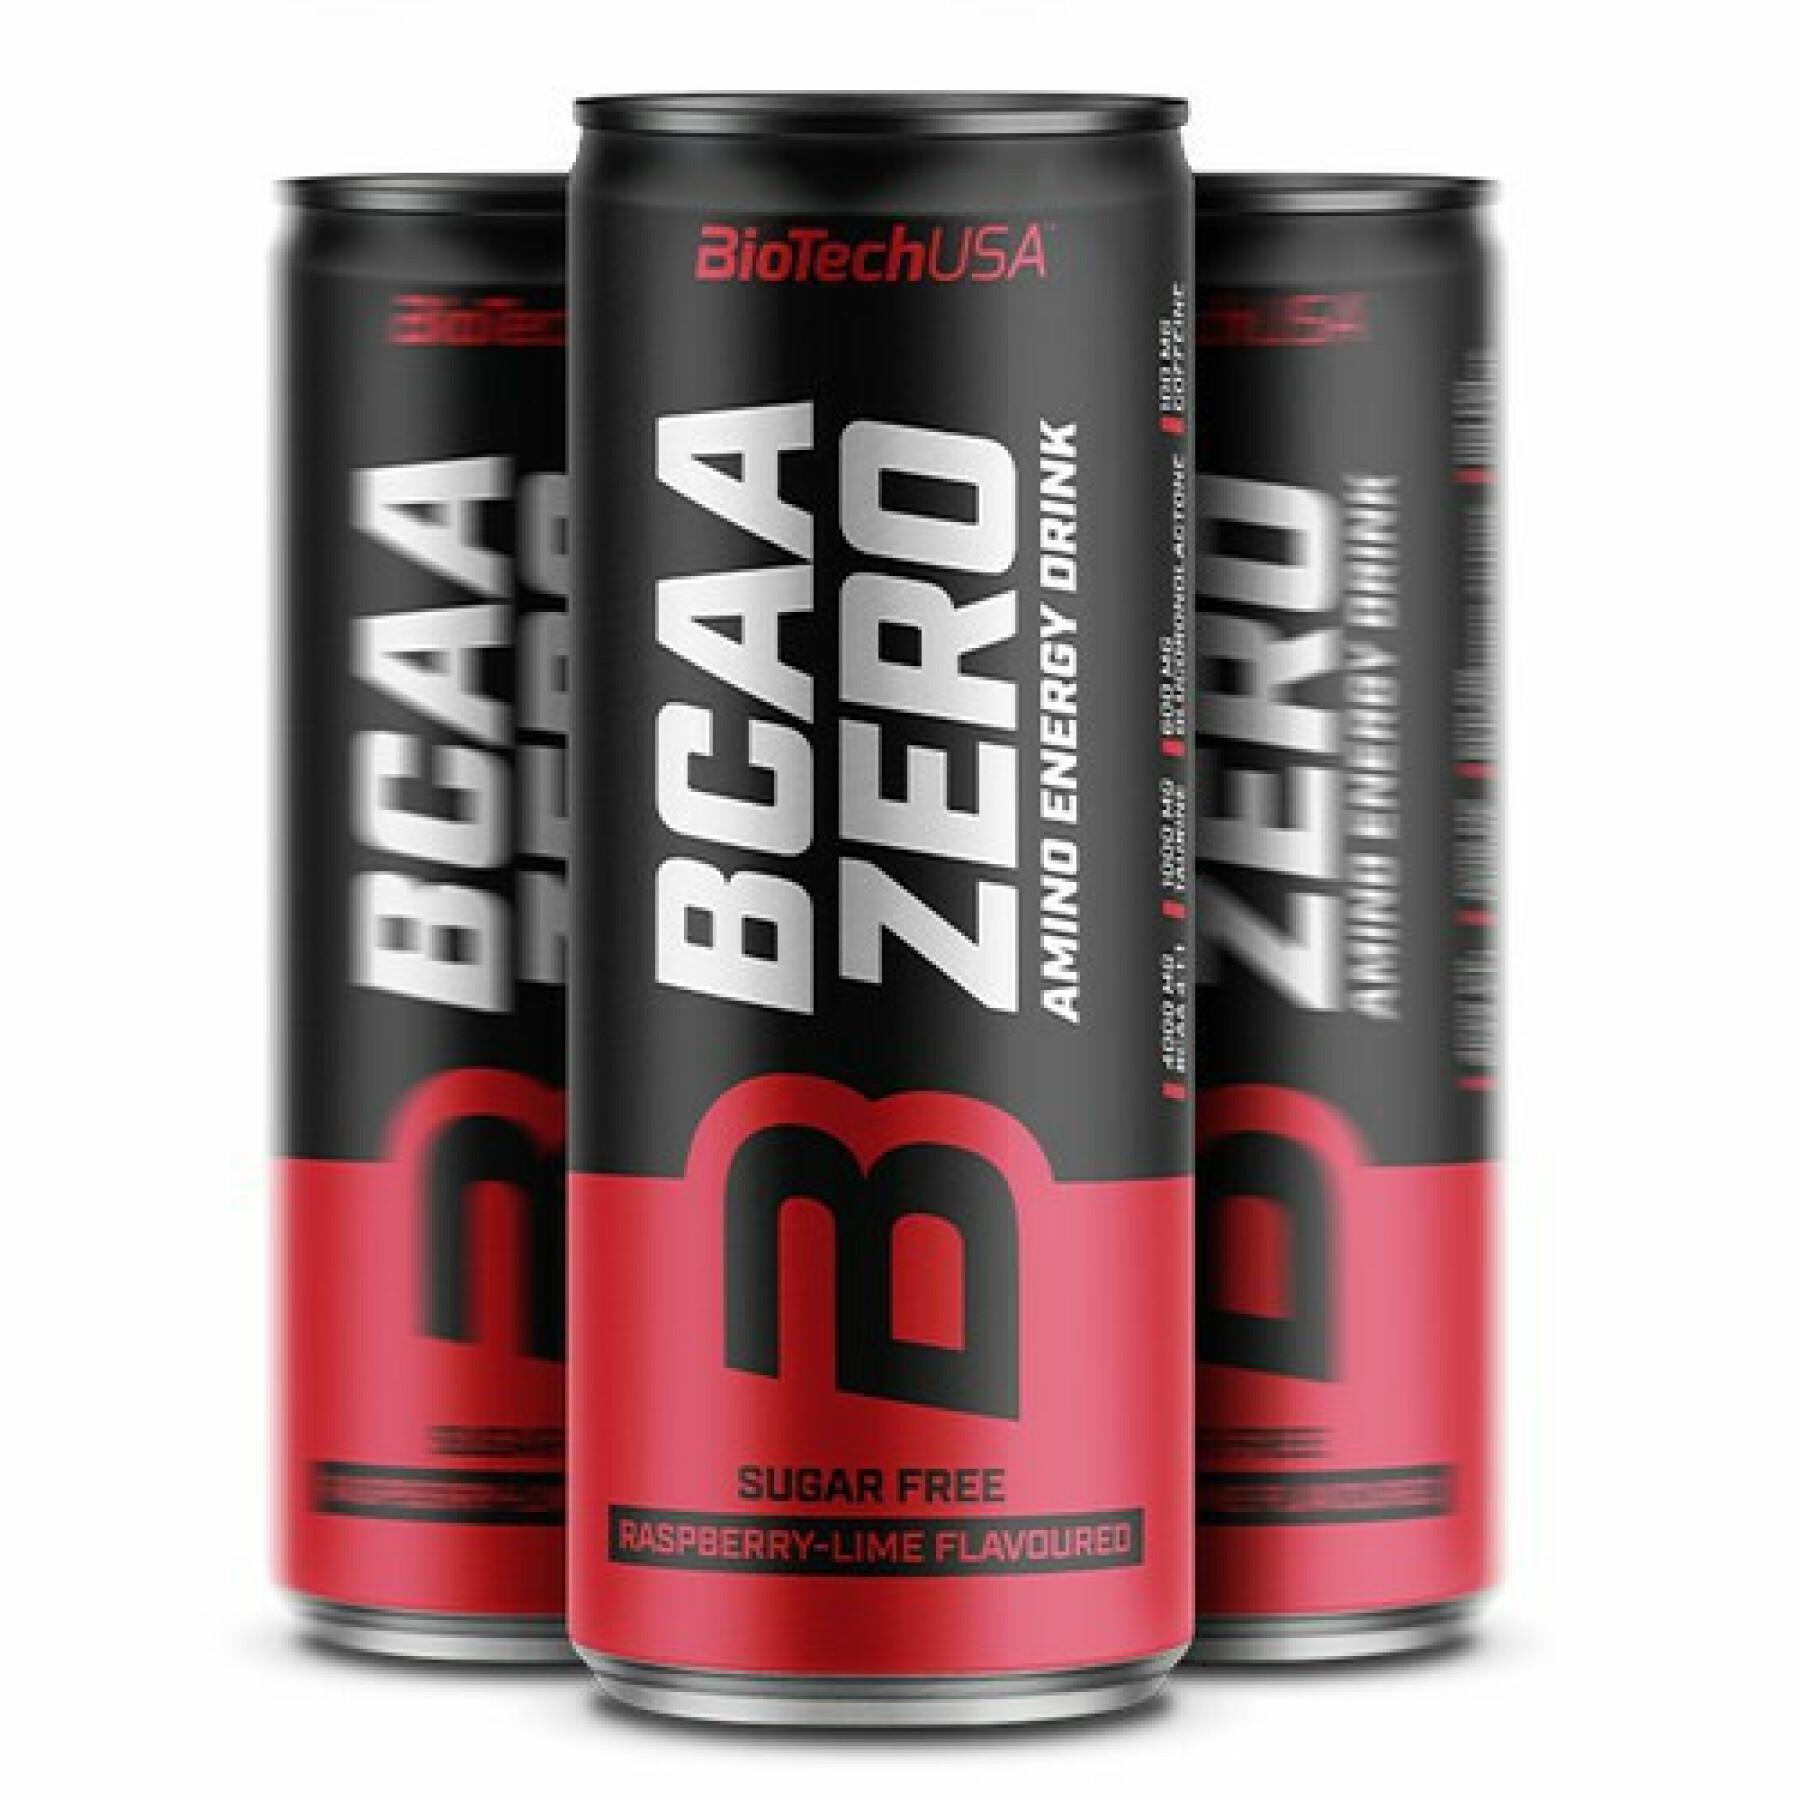 24 cans of energy drinks Biotech USA BCAA ZERO Energy Drink - Framnoise-lime